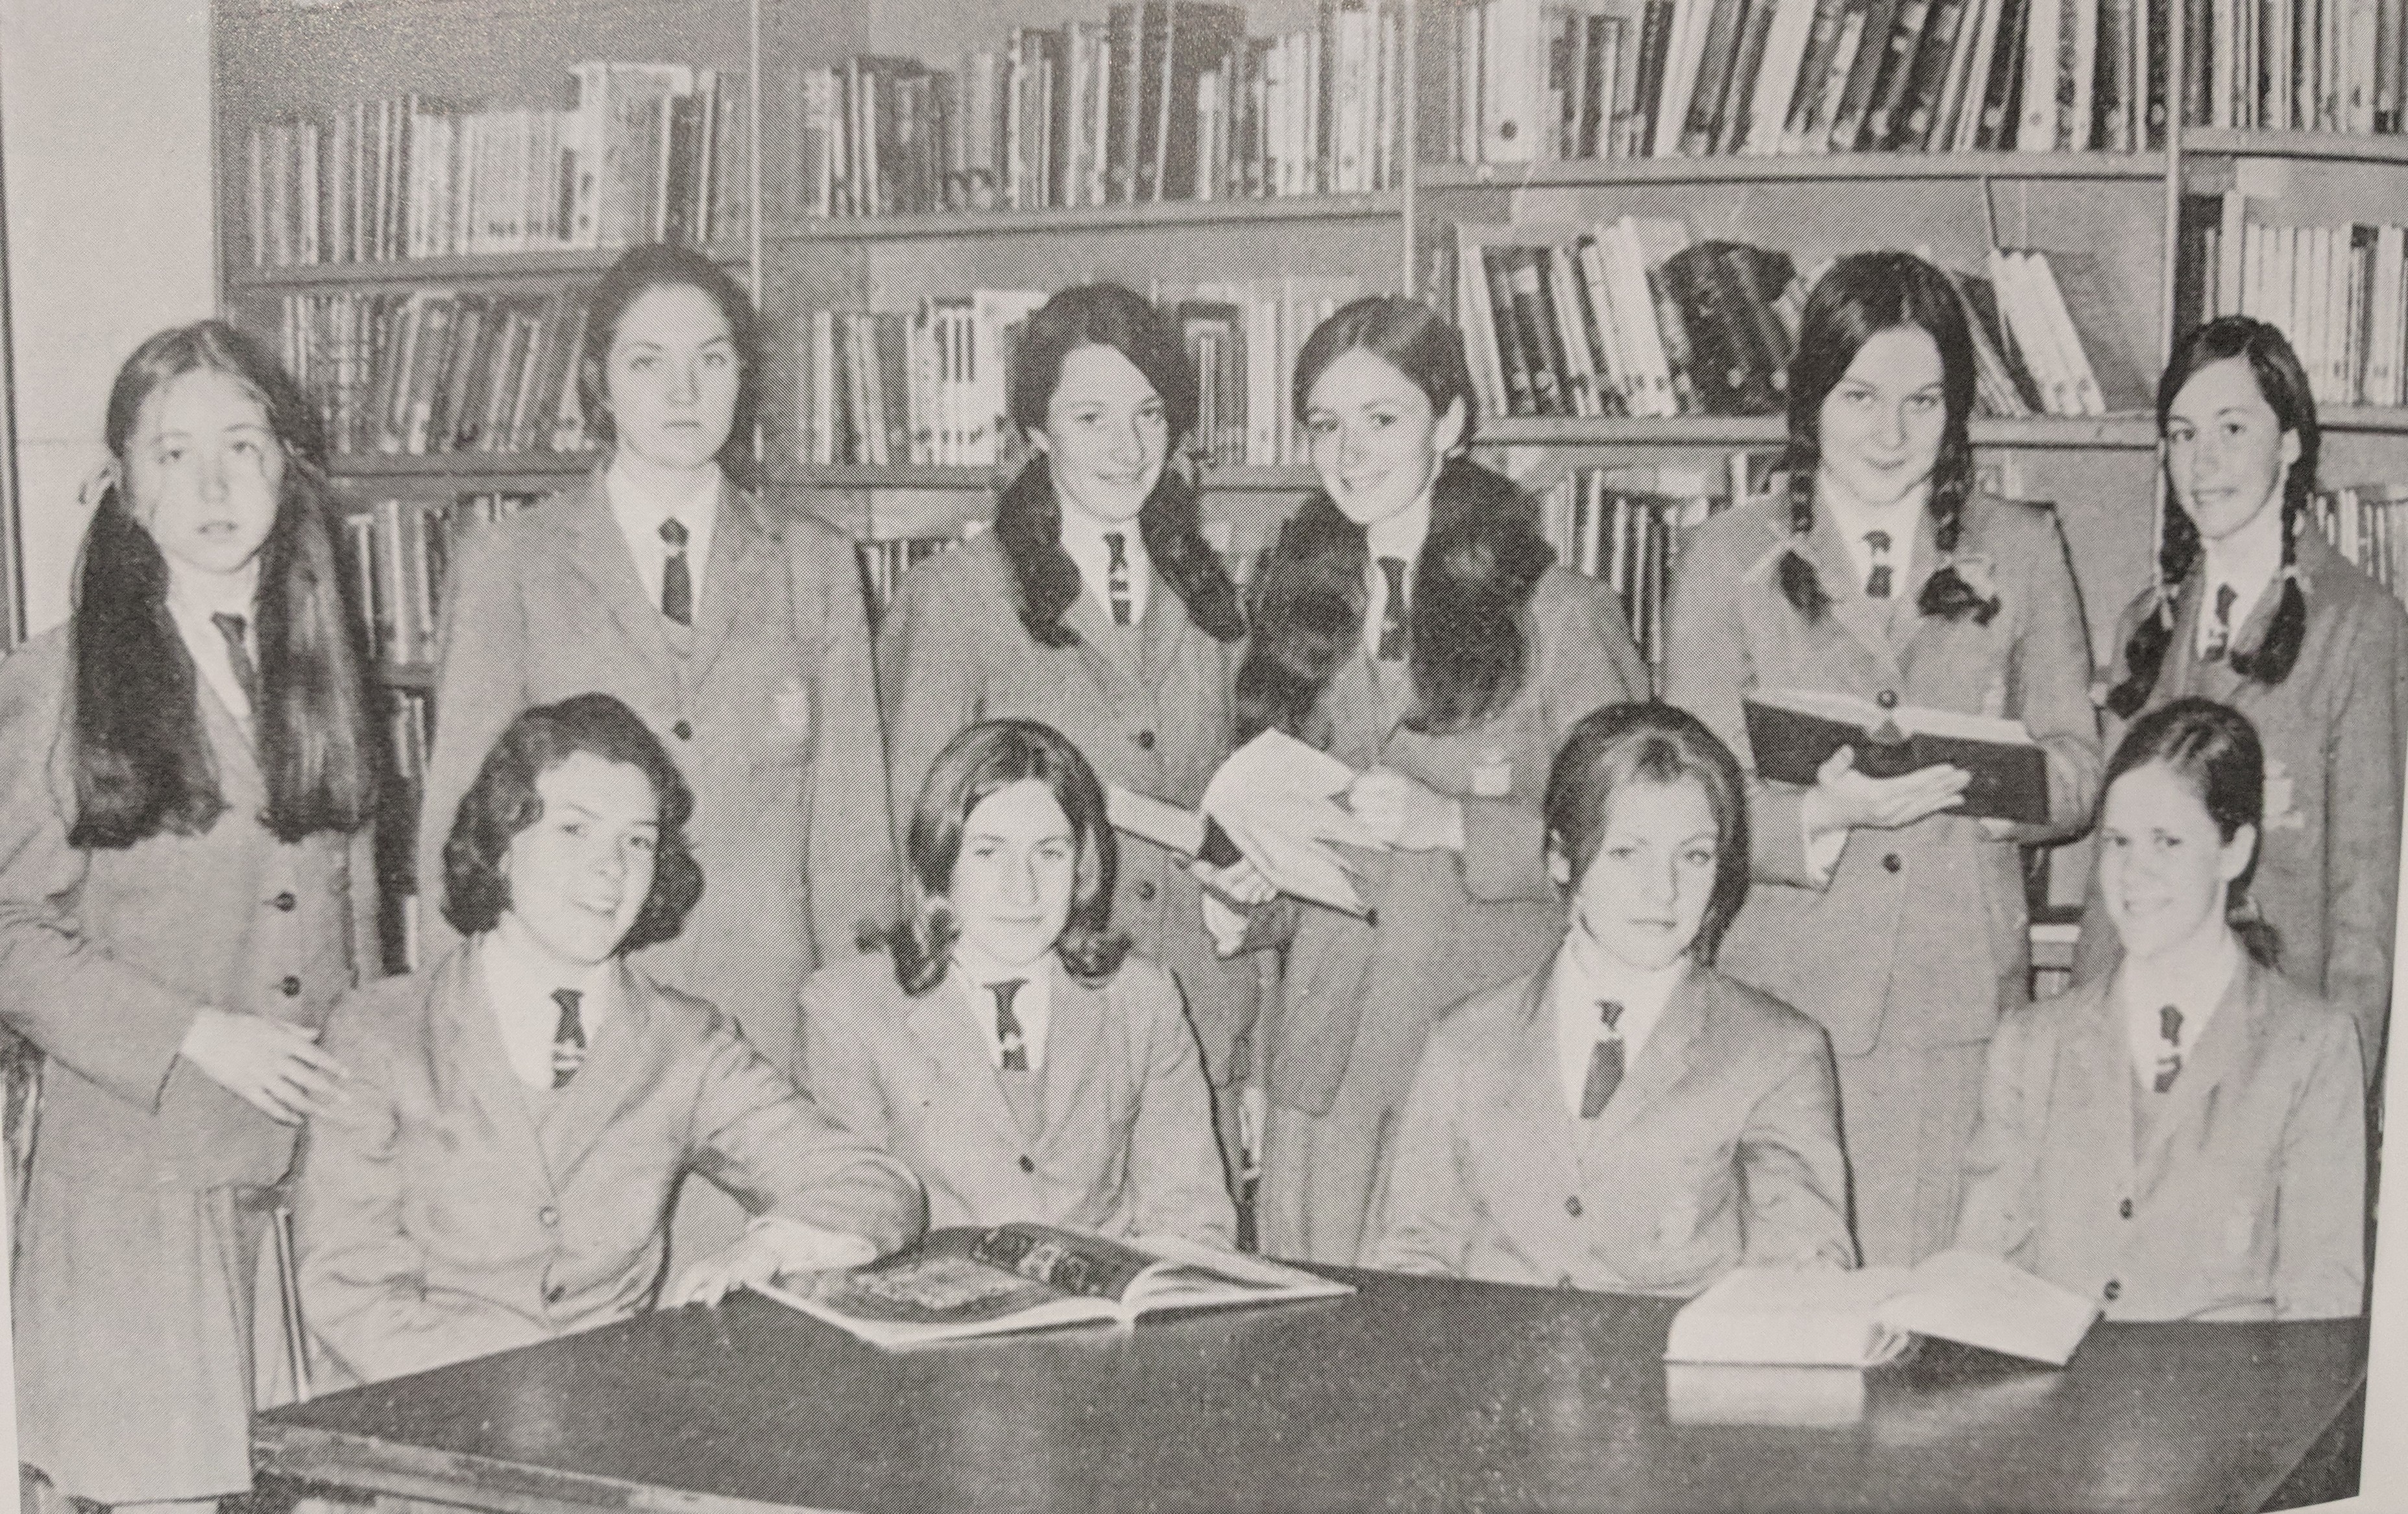 Mary Doyle pictured in the debating team, 1970